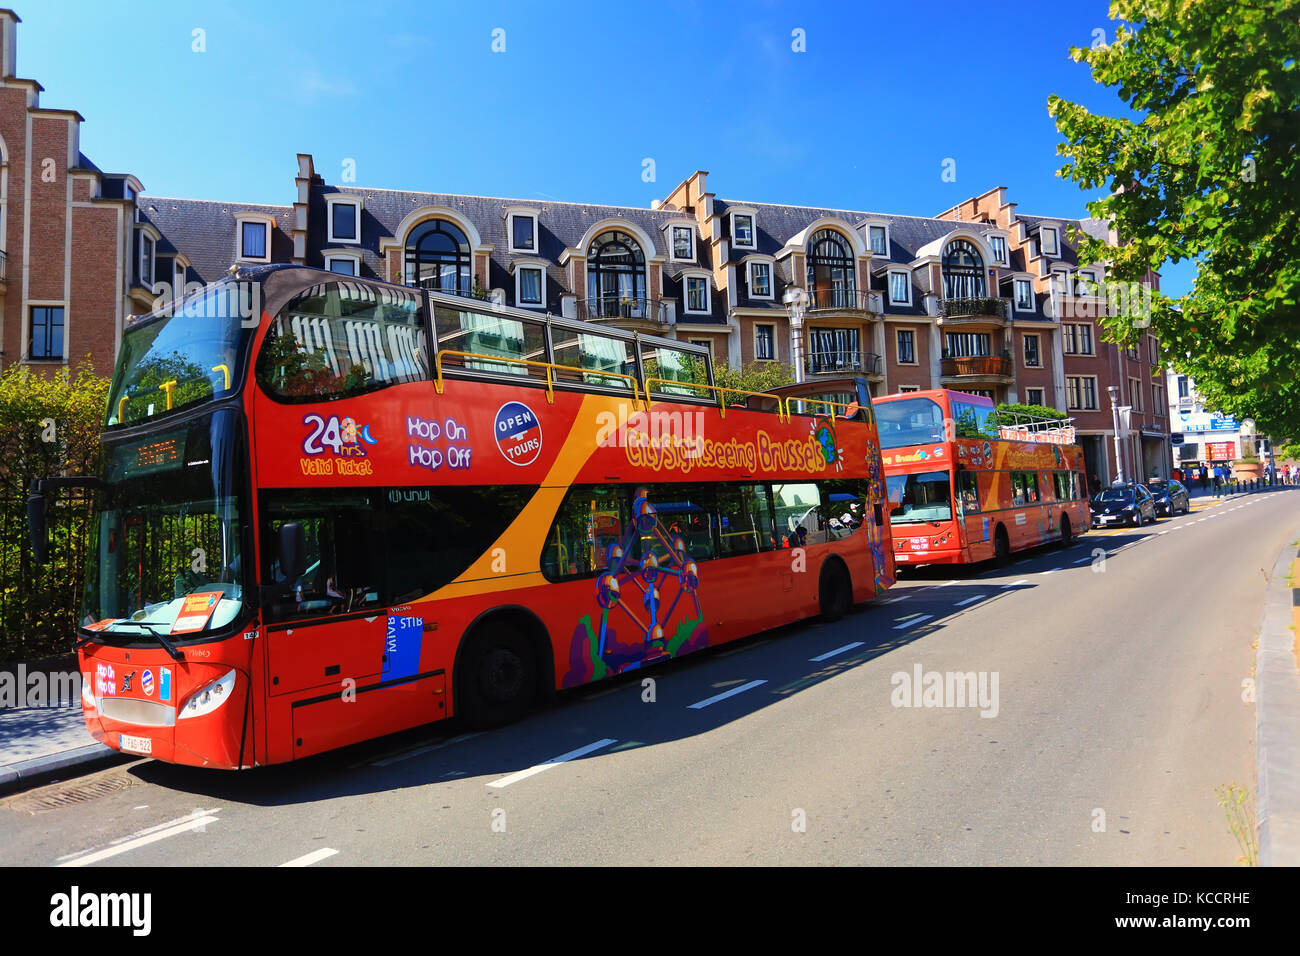 Brussels, Belgium - July 17, 2017: Red tourist buses of City Sightseeing Brussels. Famous Hop-On Hop-Off tourist buses on a sunny day in Brussels. Stock Photo